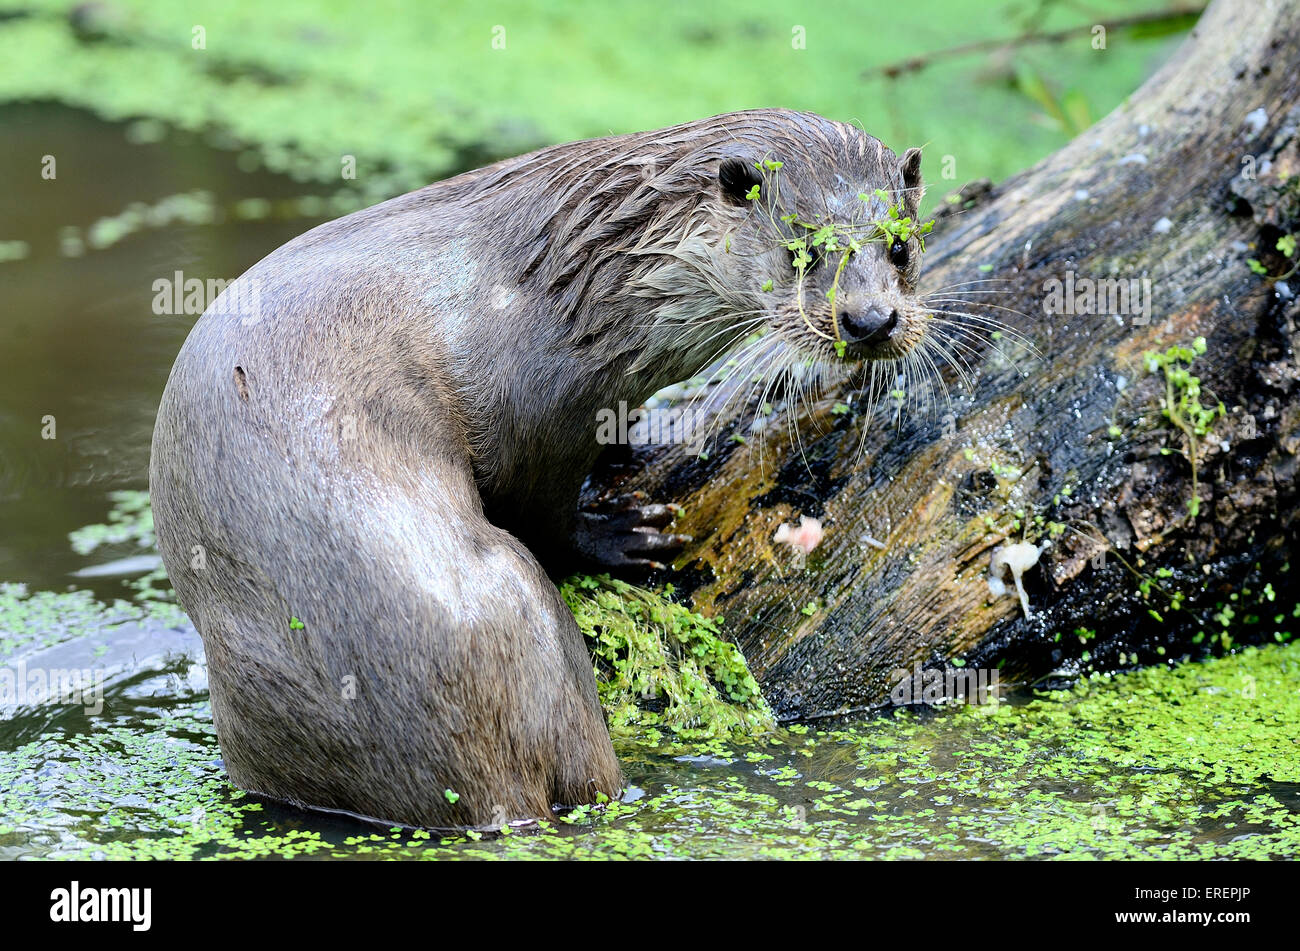 Otter climbing out of the water UK Stock Photo